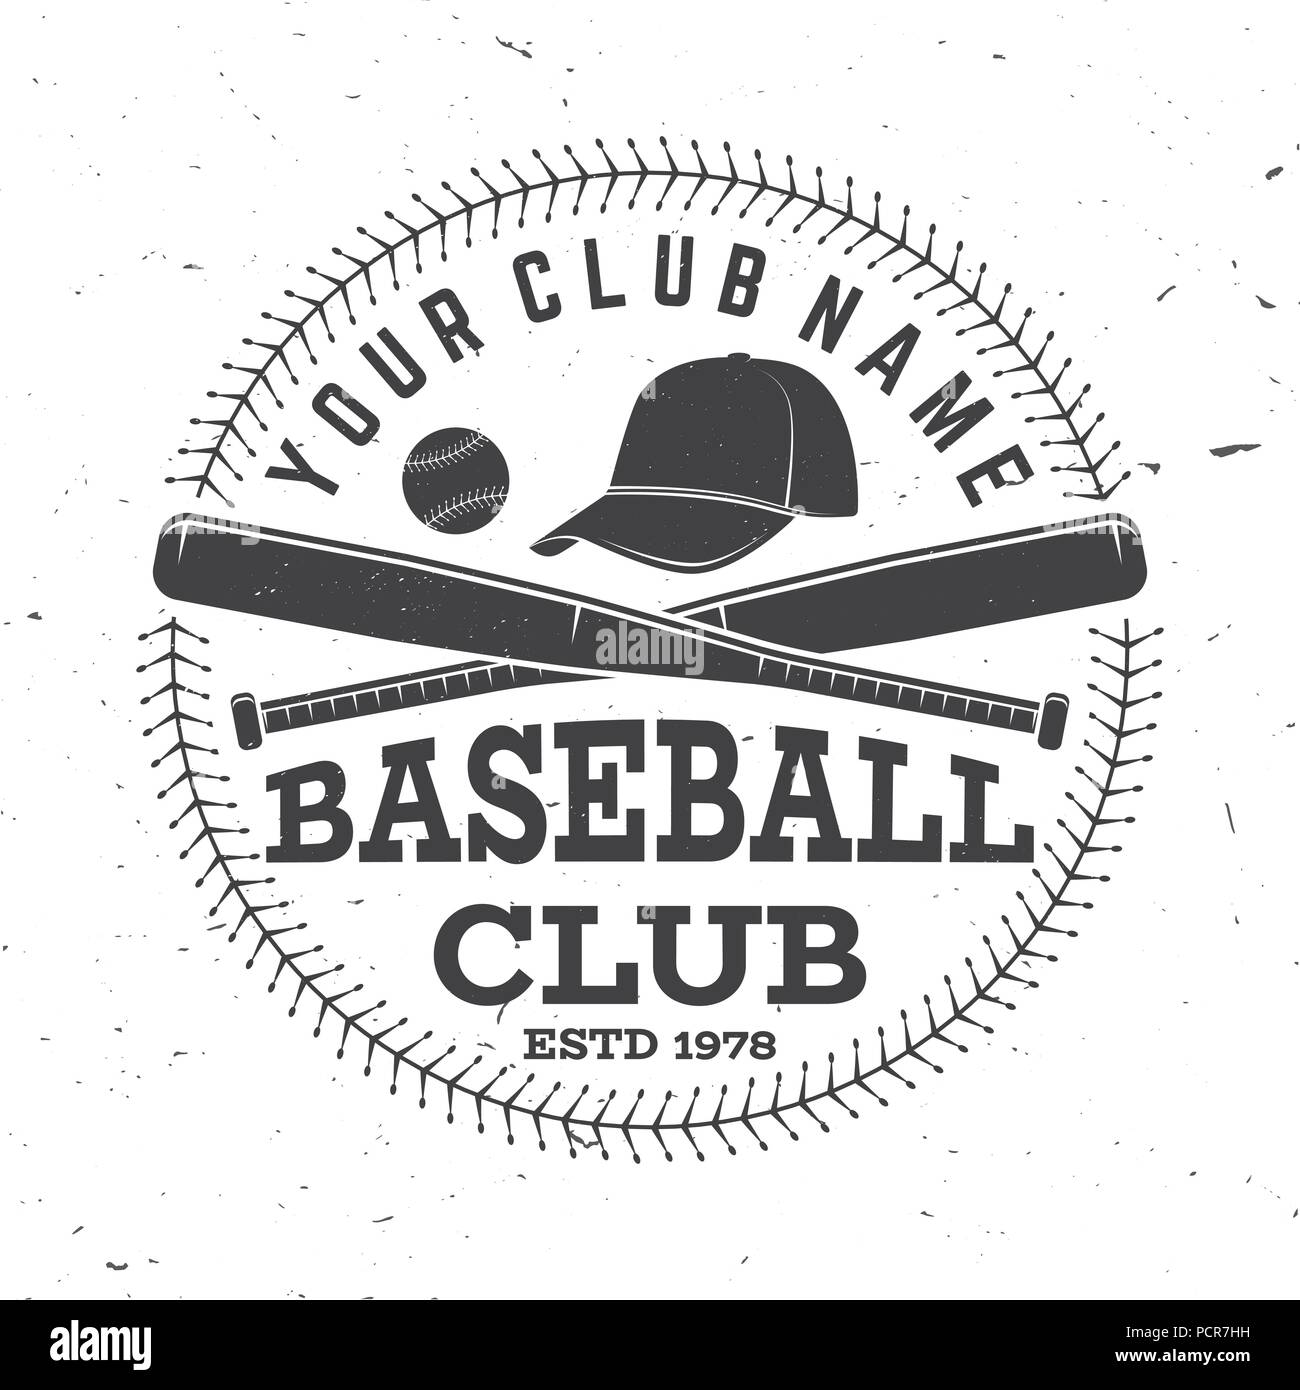 Baseball club badge. Vector illustration. Concept for shirt or logo, print, stamp or tee. Vintage typography design with baseball bats, cap and ball for baseball silhouette. Stock Vector